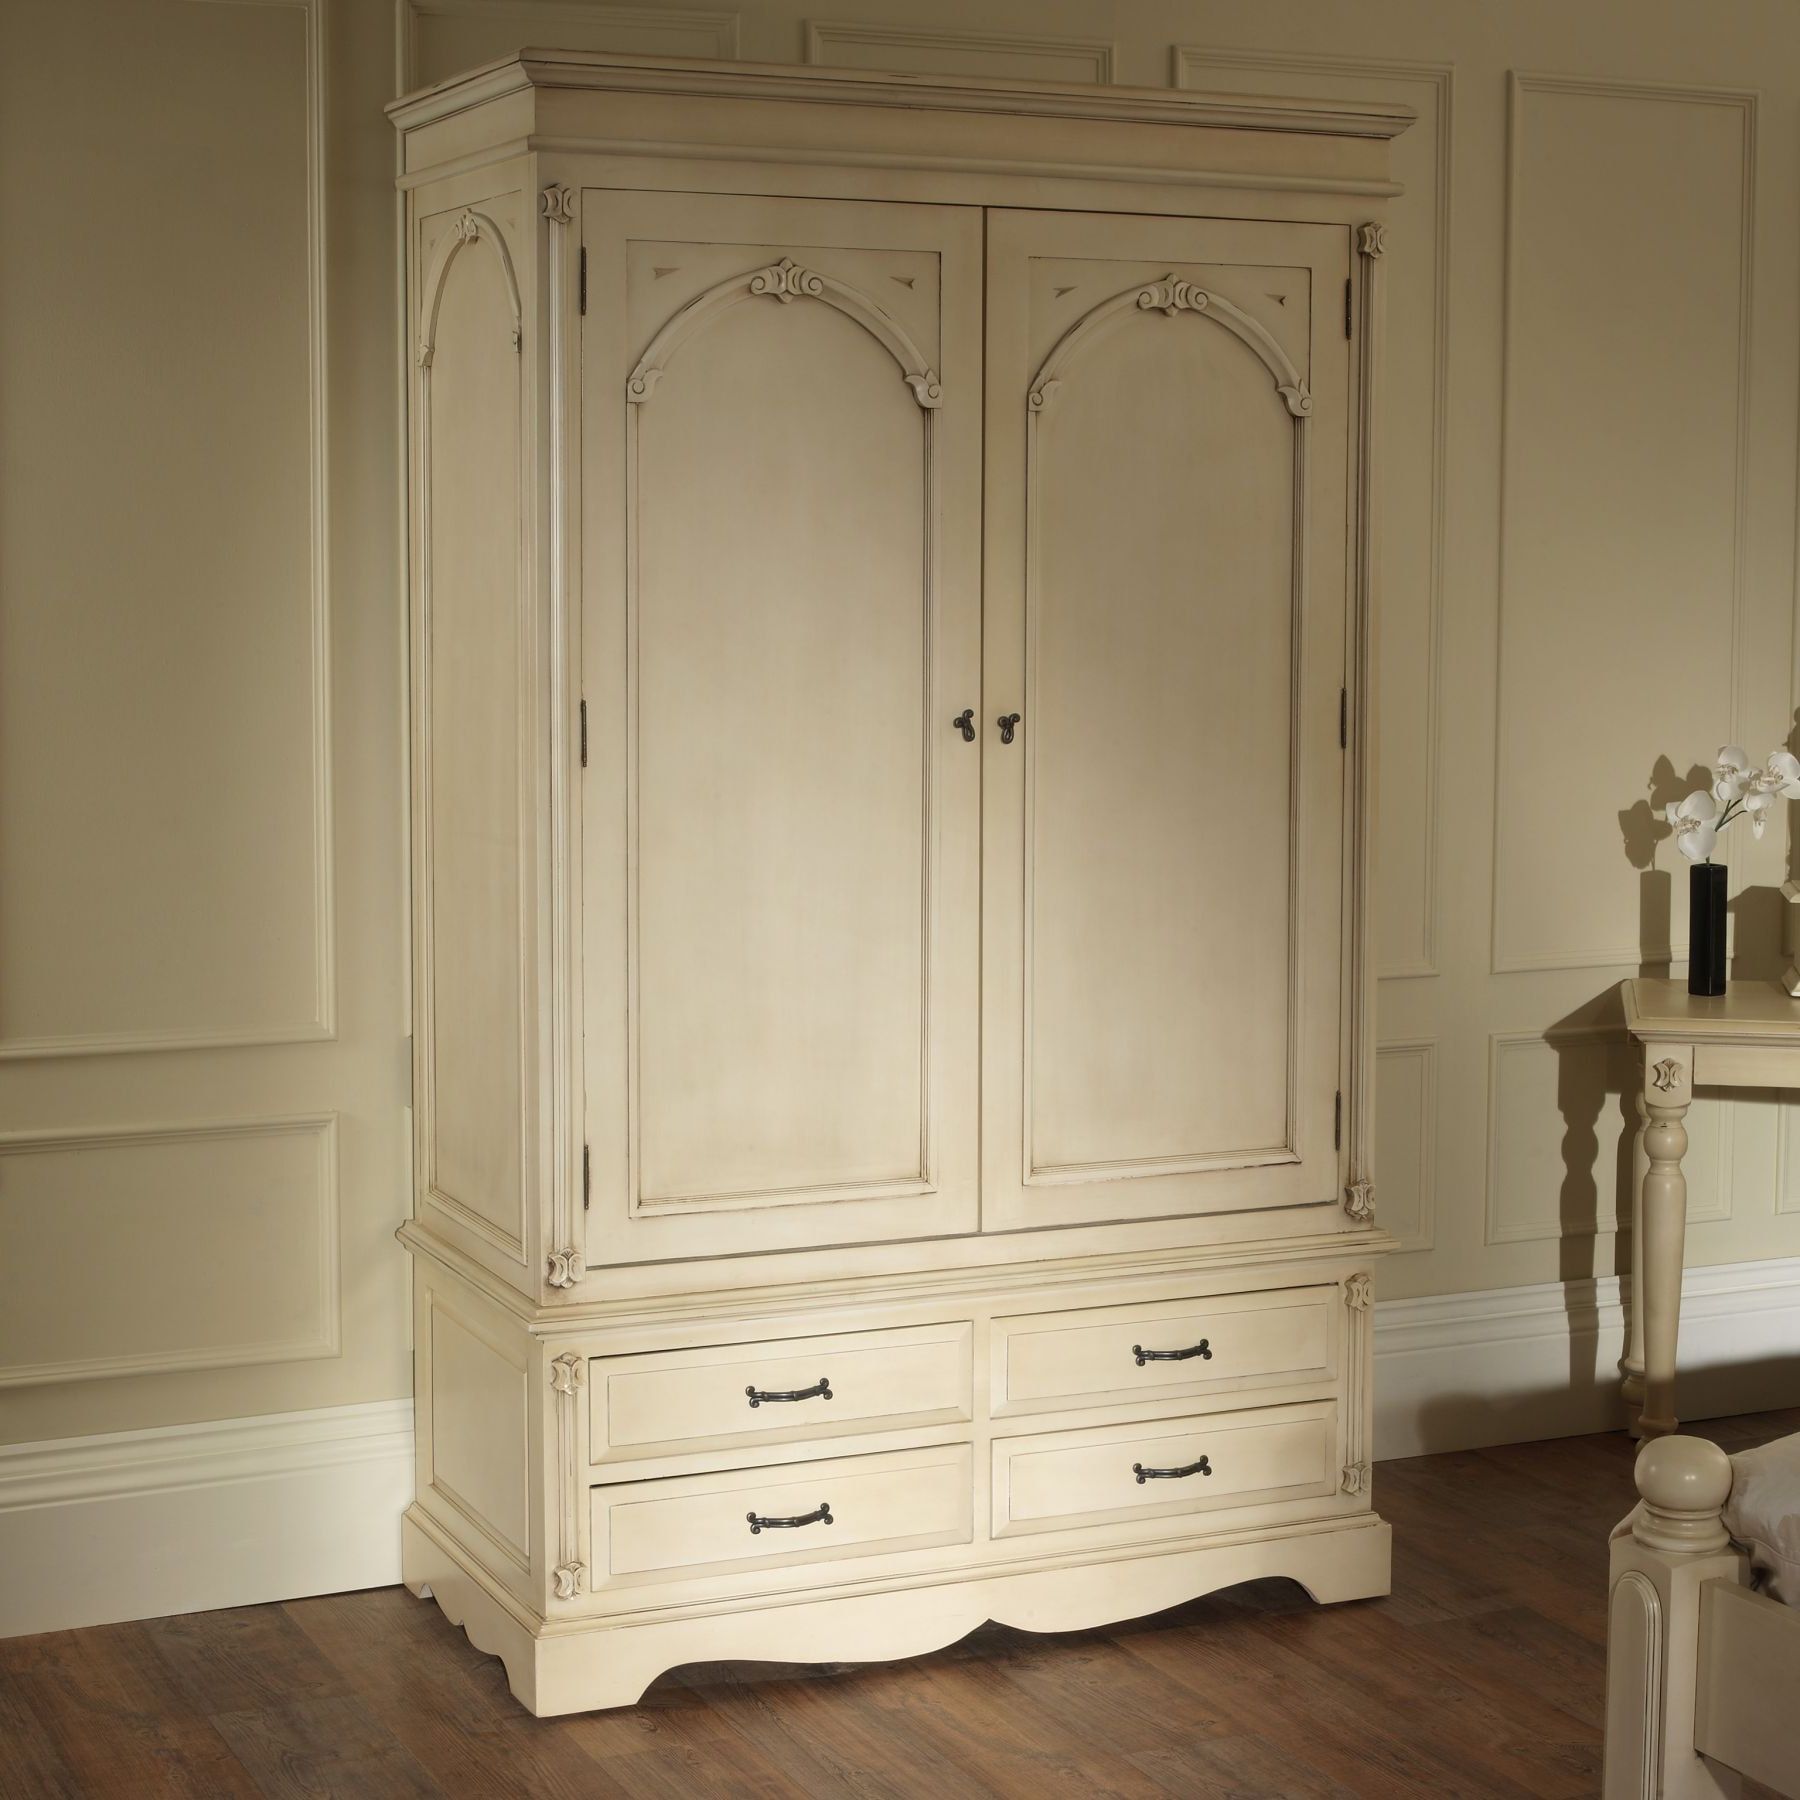 Victorian Antique French Wardrobe Works Well Alongside Our Shabby Chic  Furniture Intended For Victorian Wardrobes (Gallery 5 of 20)